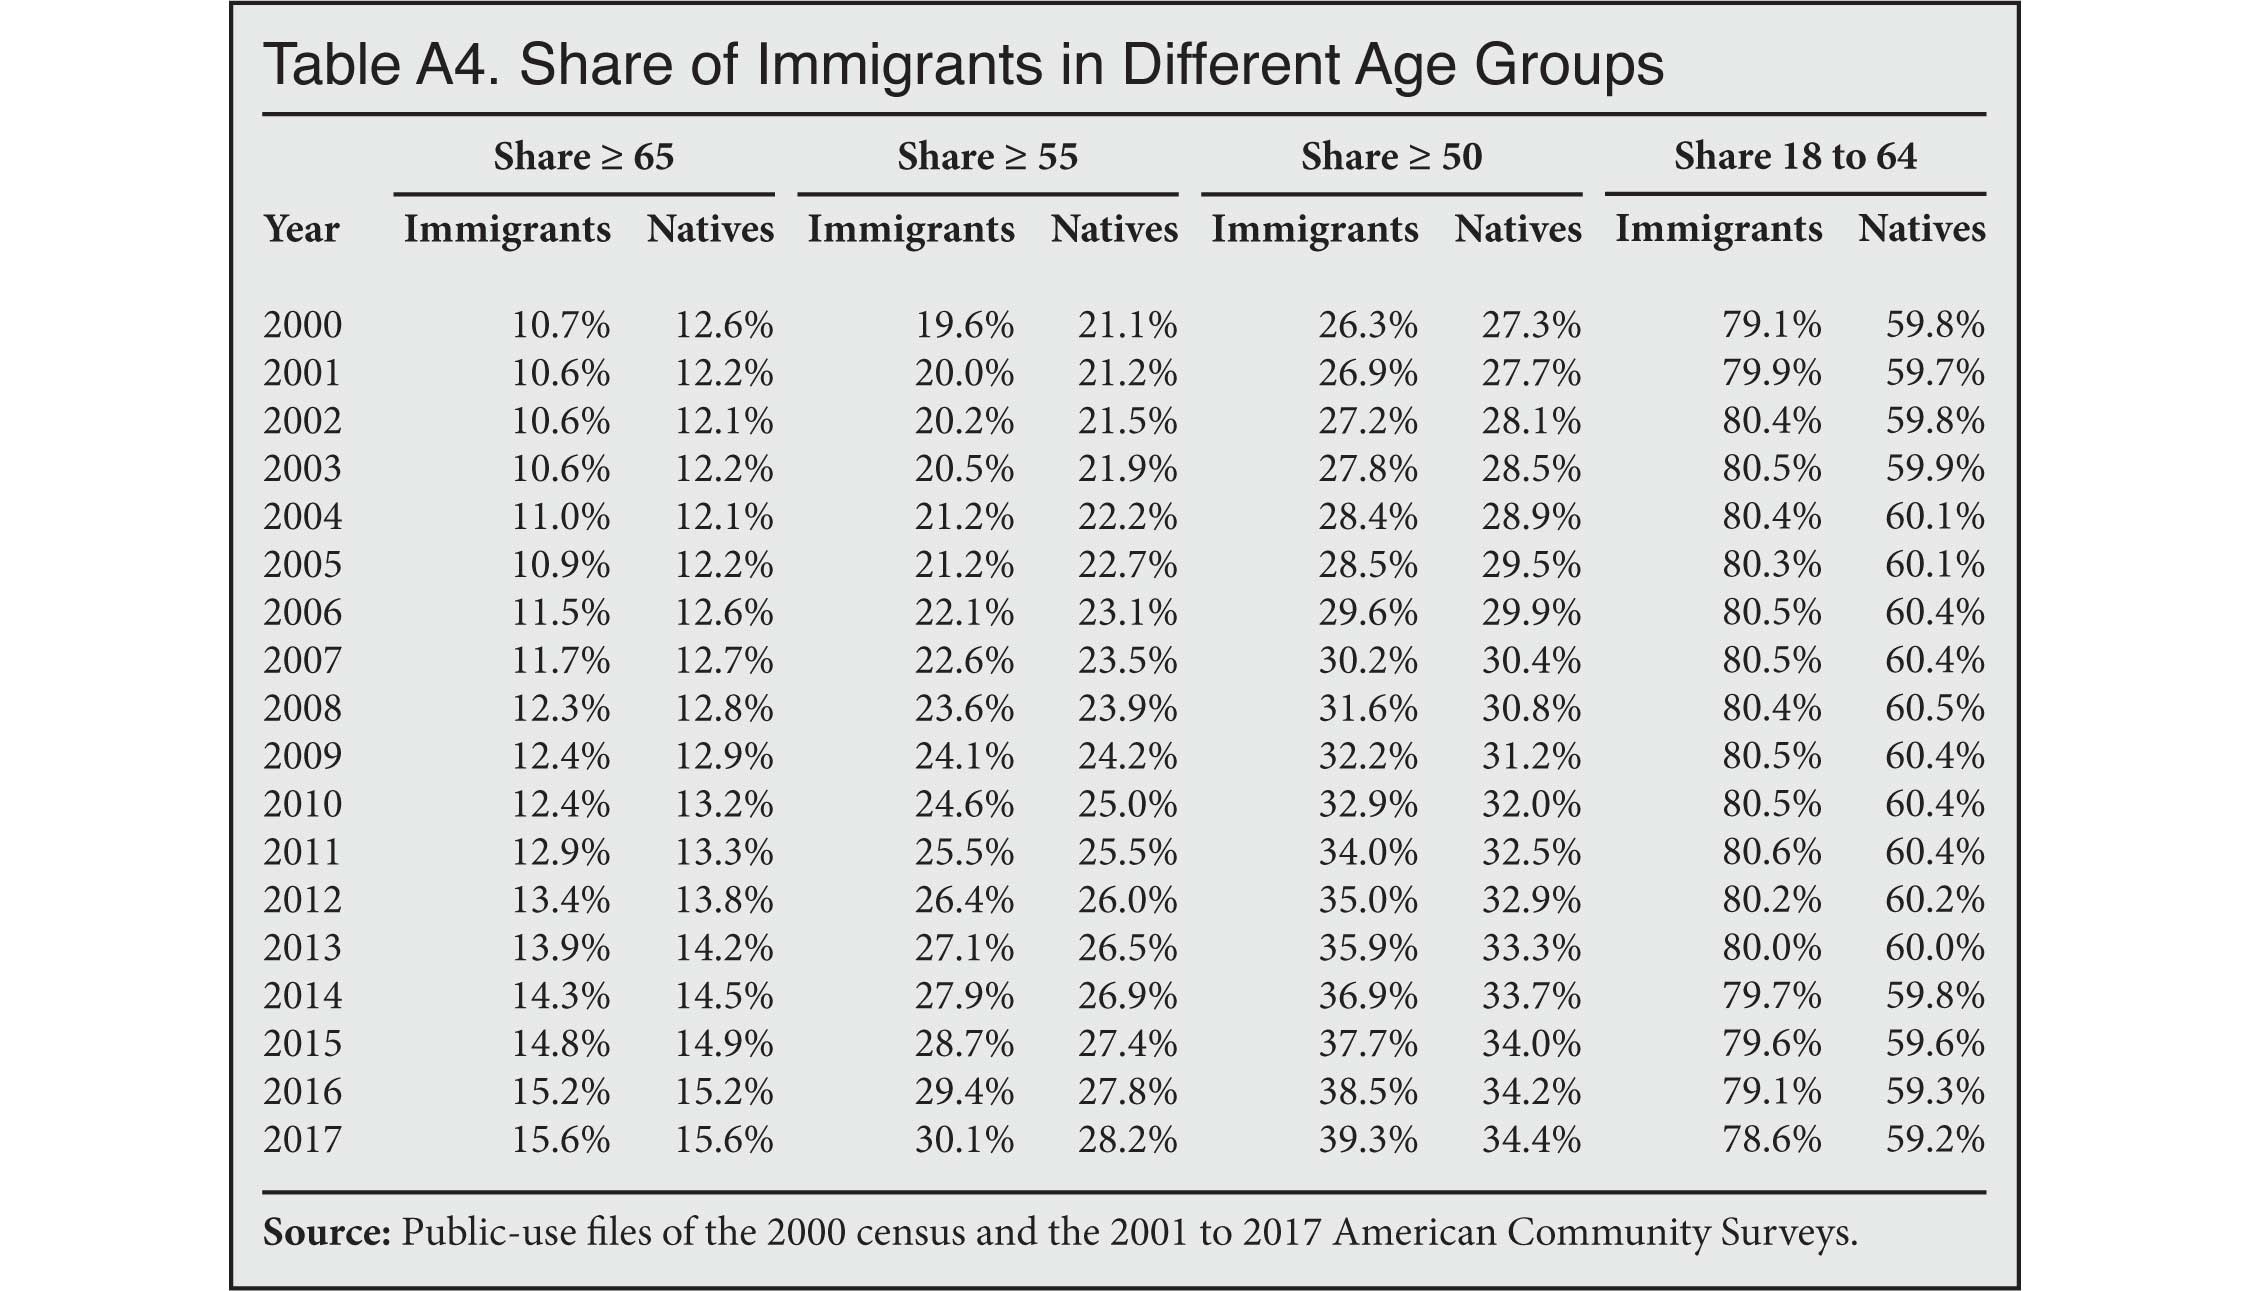 Table: Share of Immigrants in Different Age Groups